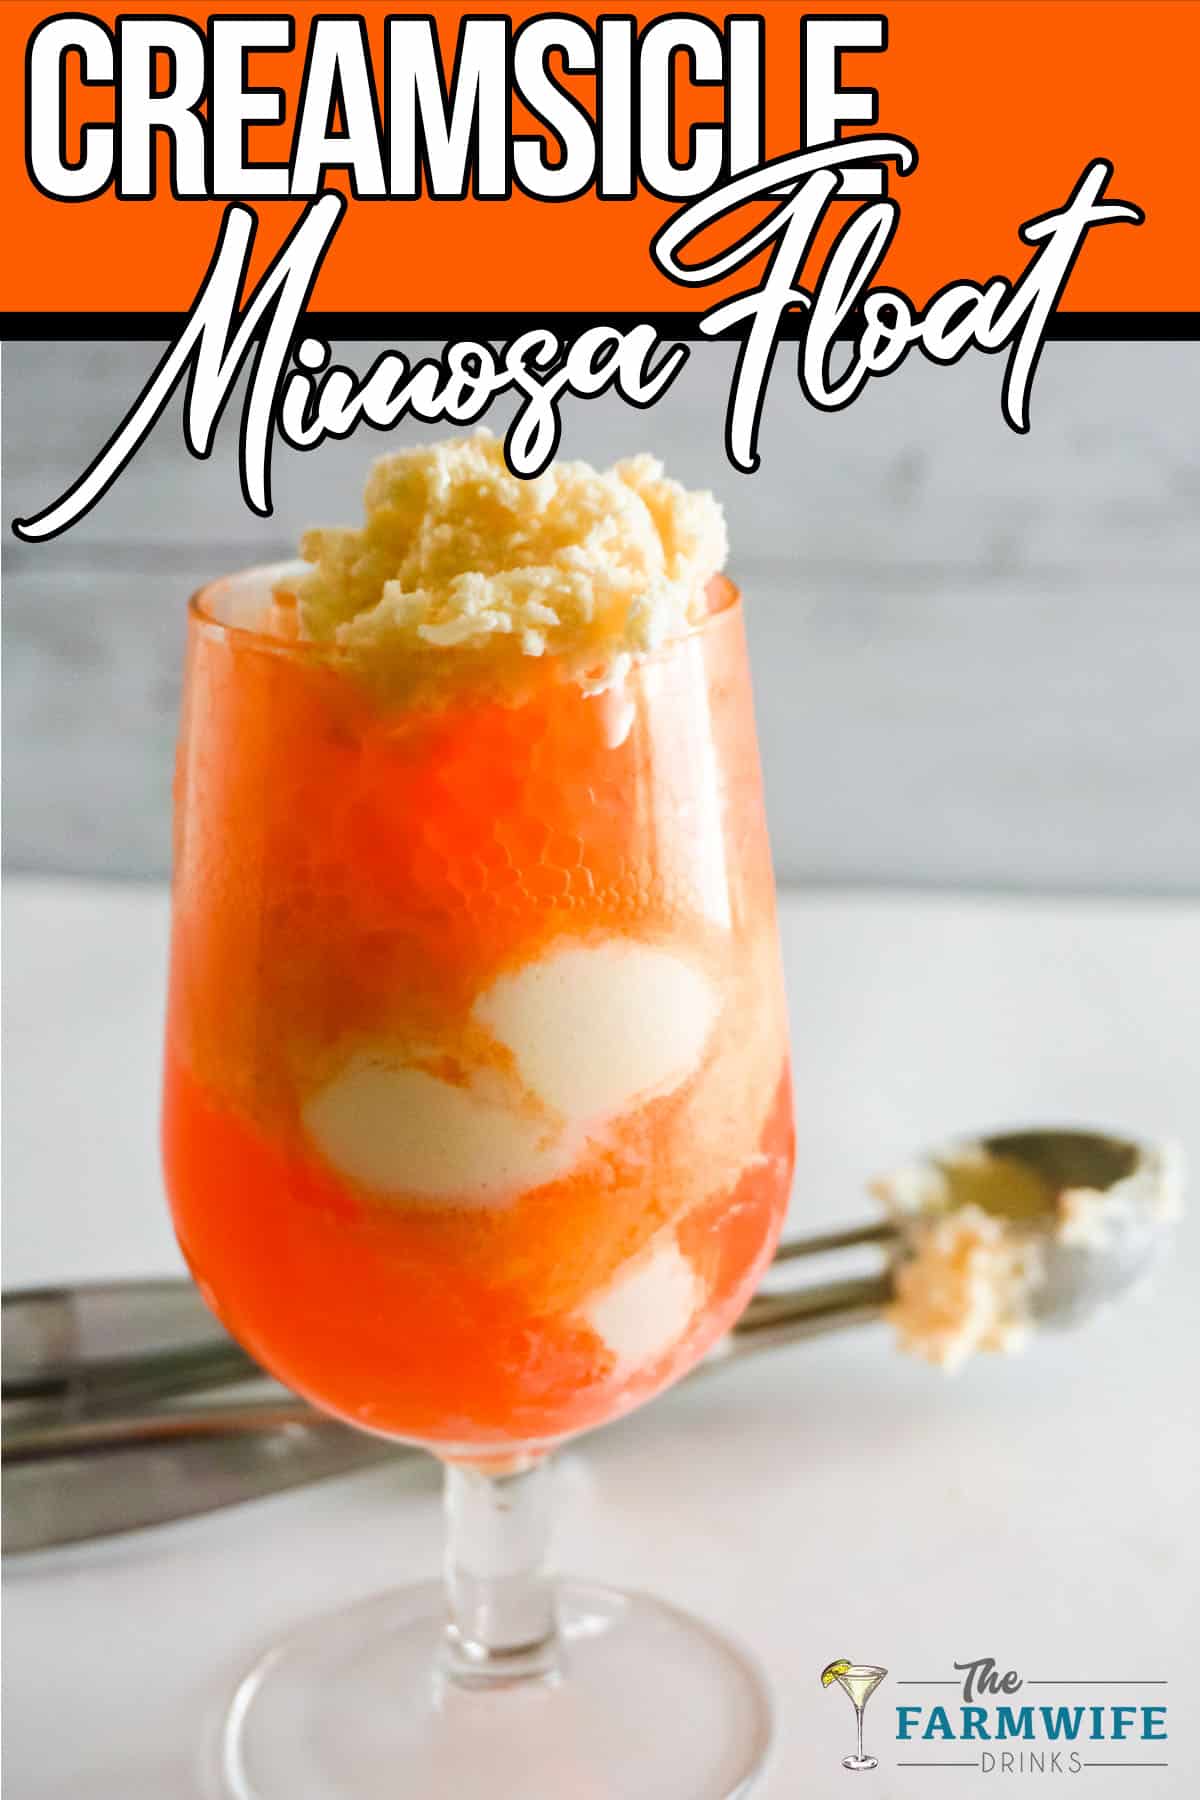 Creamsicle Mimosa Float with words above cocktail.